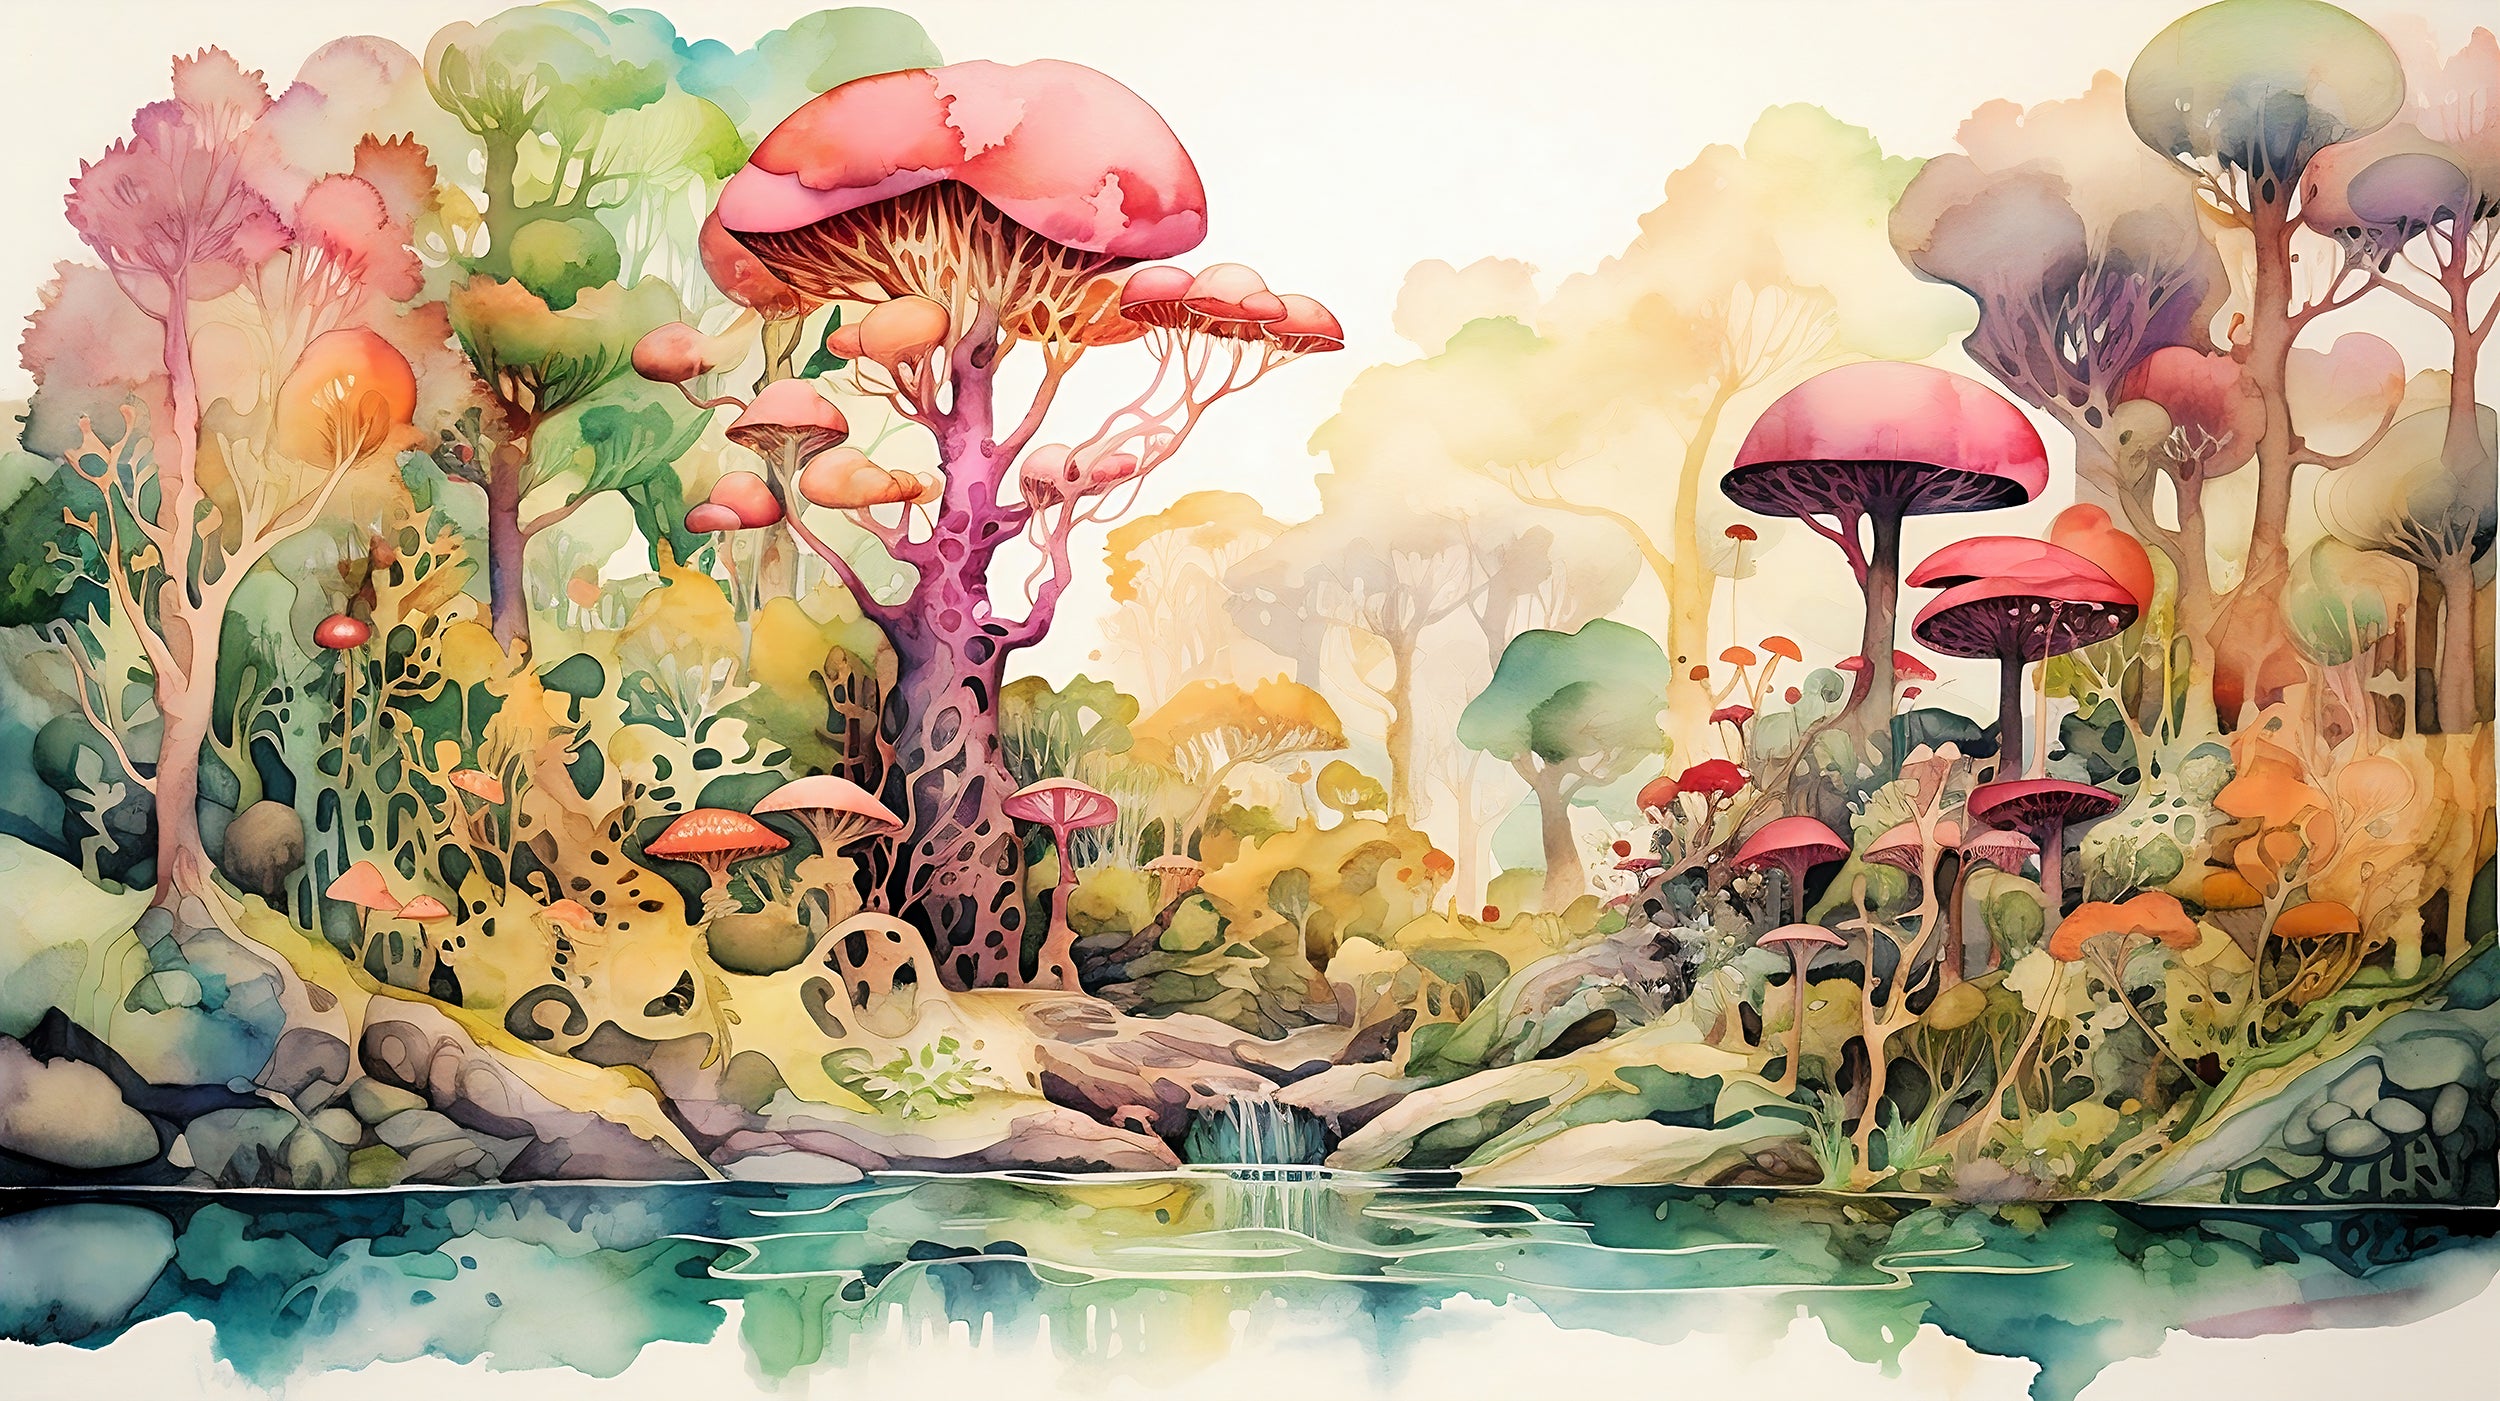 Watercolor Kids Room Wall Art with Playful Mushrooms